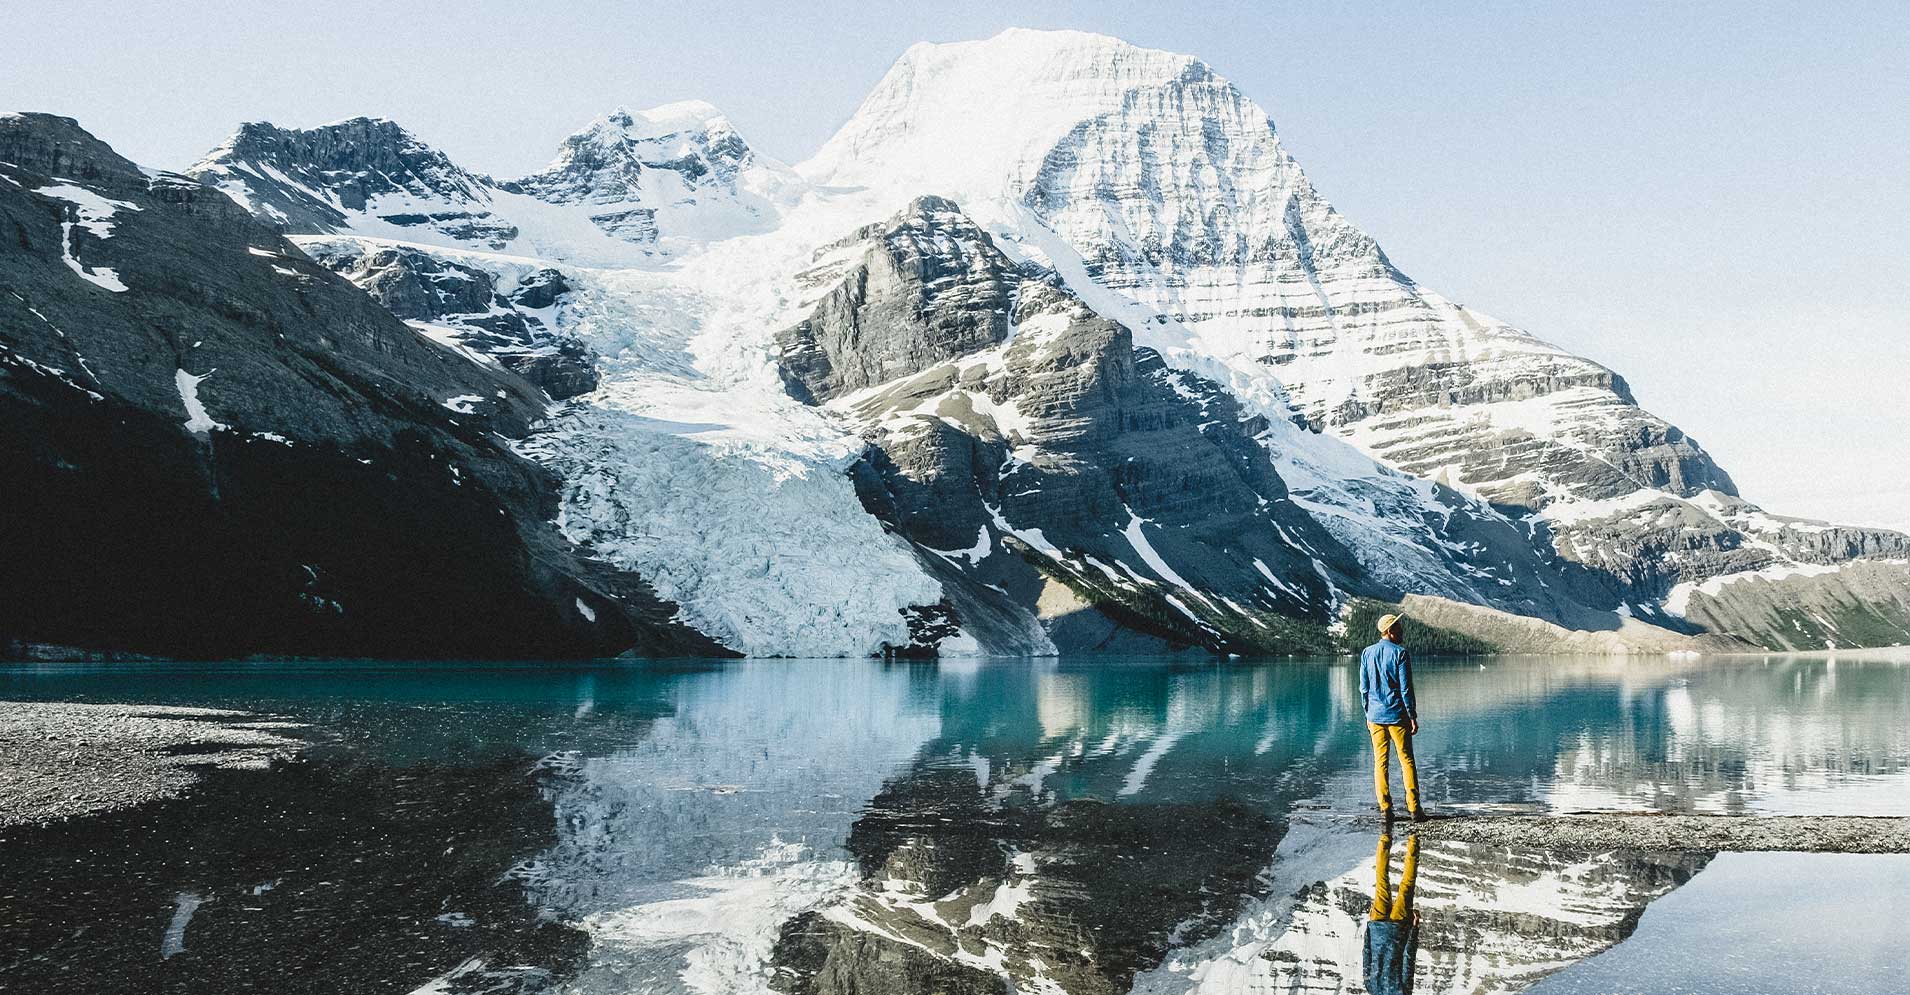 Hiking in Mount Robson Provincial Park